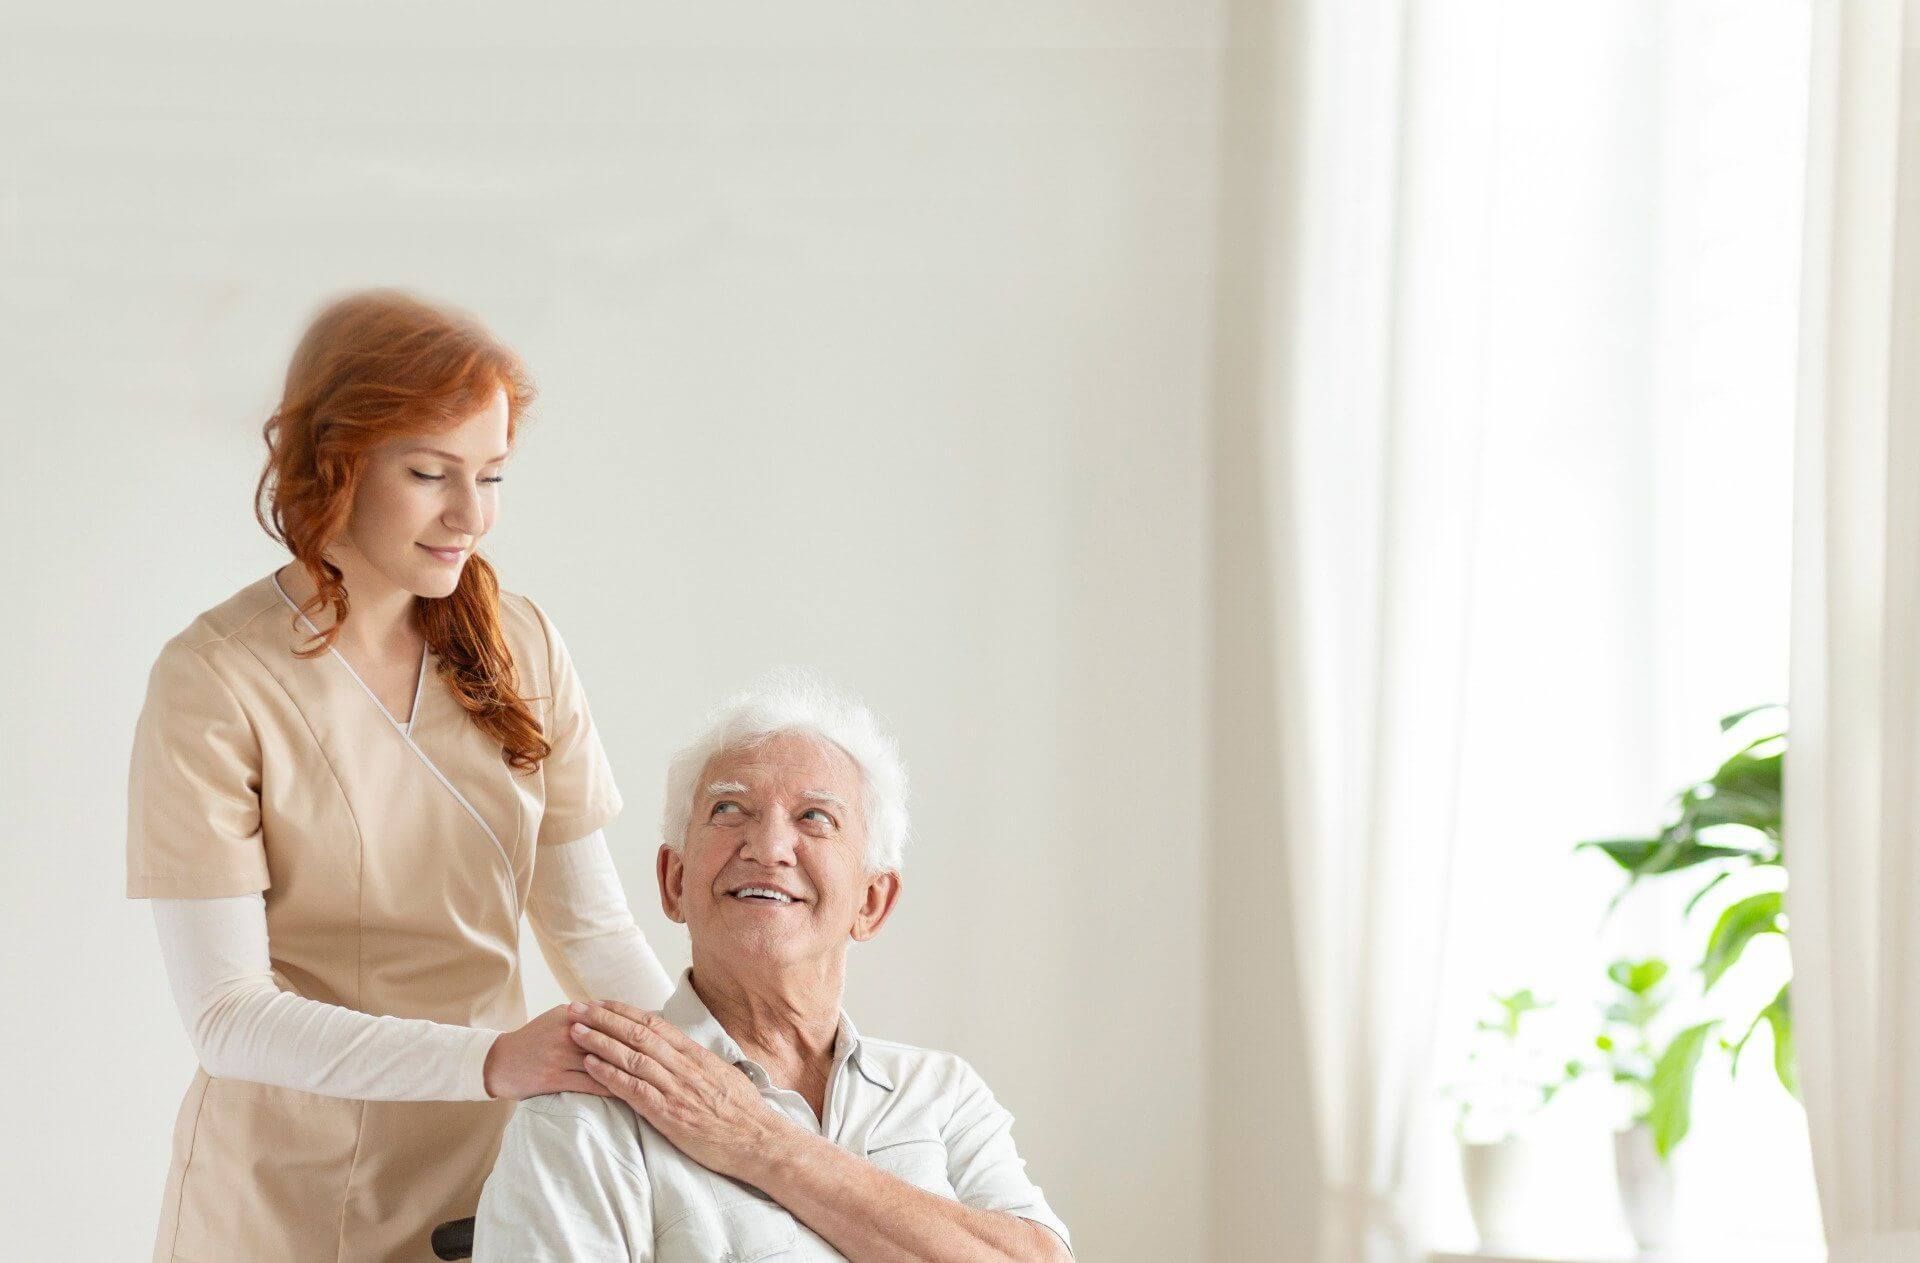 Red-haired nurse in beige scrub gently touching the shoulder of an elderly man with gray hair and eyebrows, smiling up at her, seated in a wheelchair.